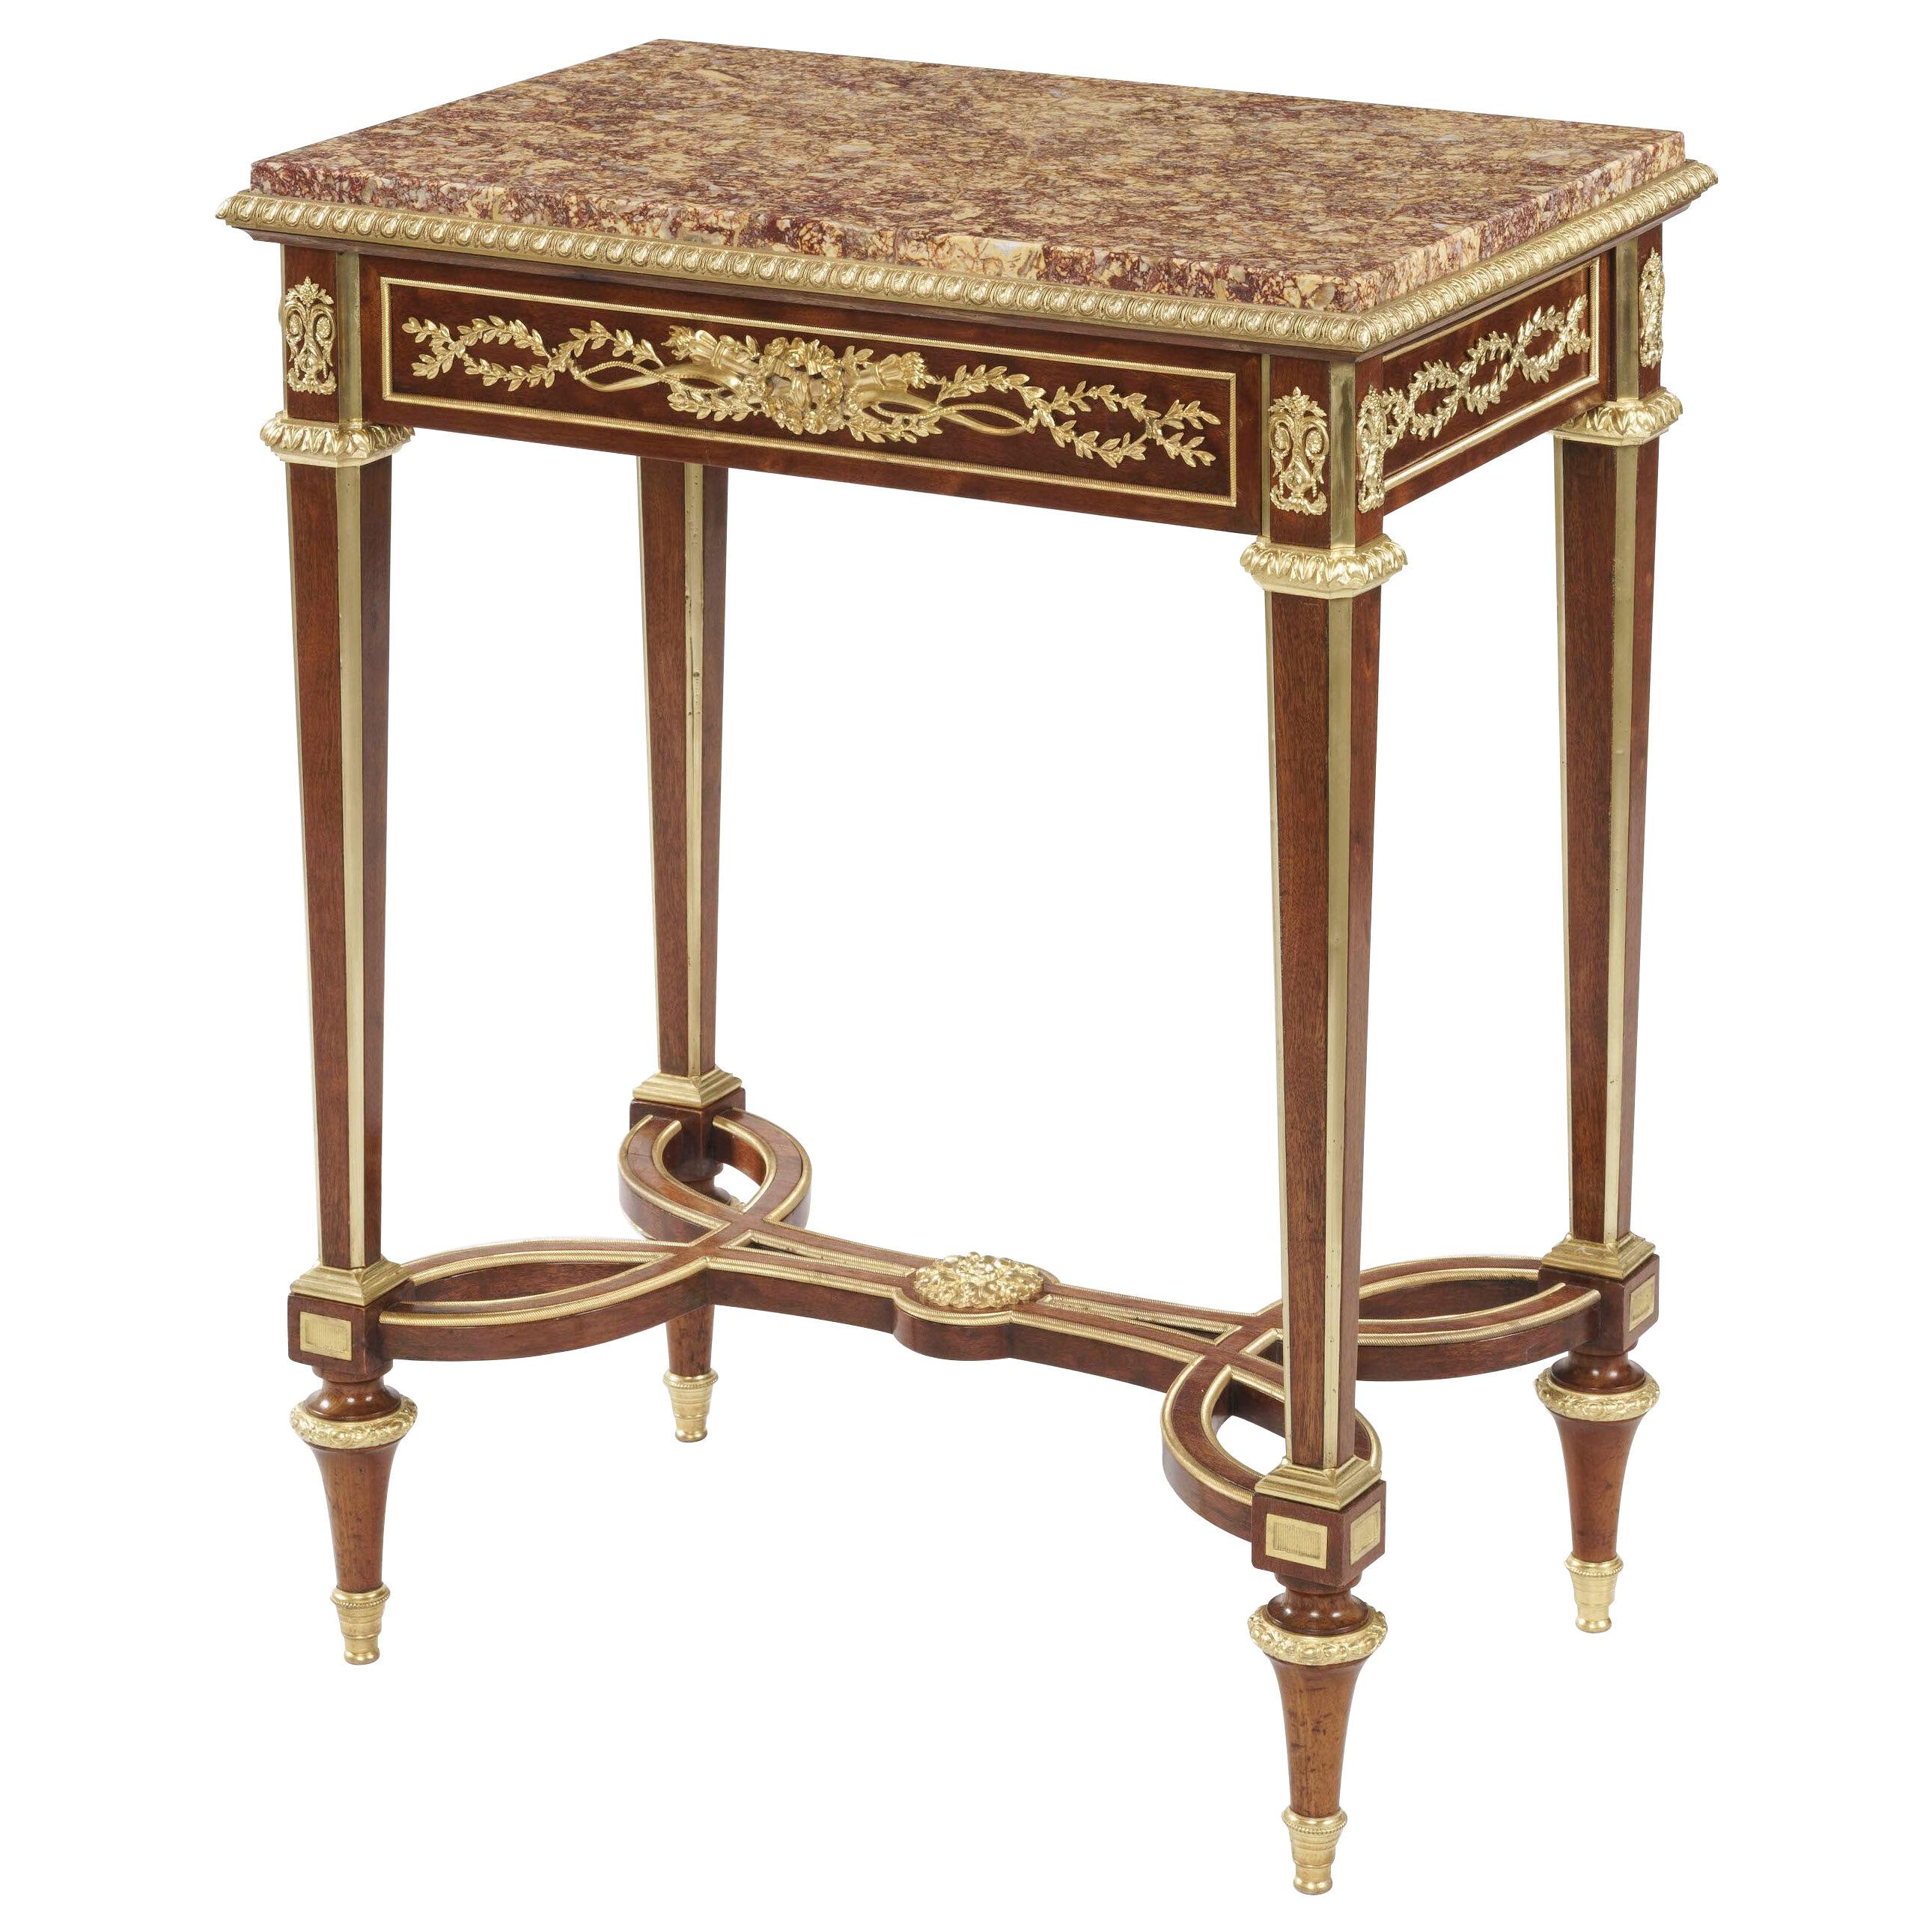 19th Century Side Table in the Louis XVI Manner by Henry Dasson